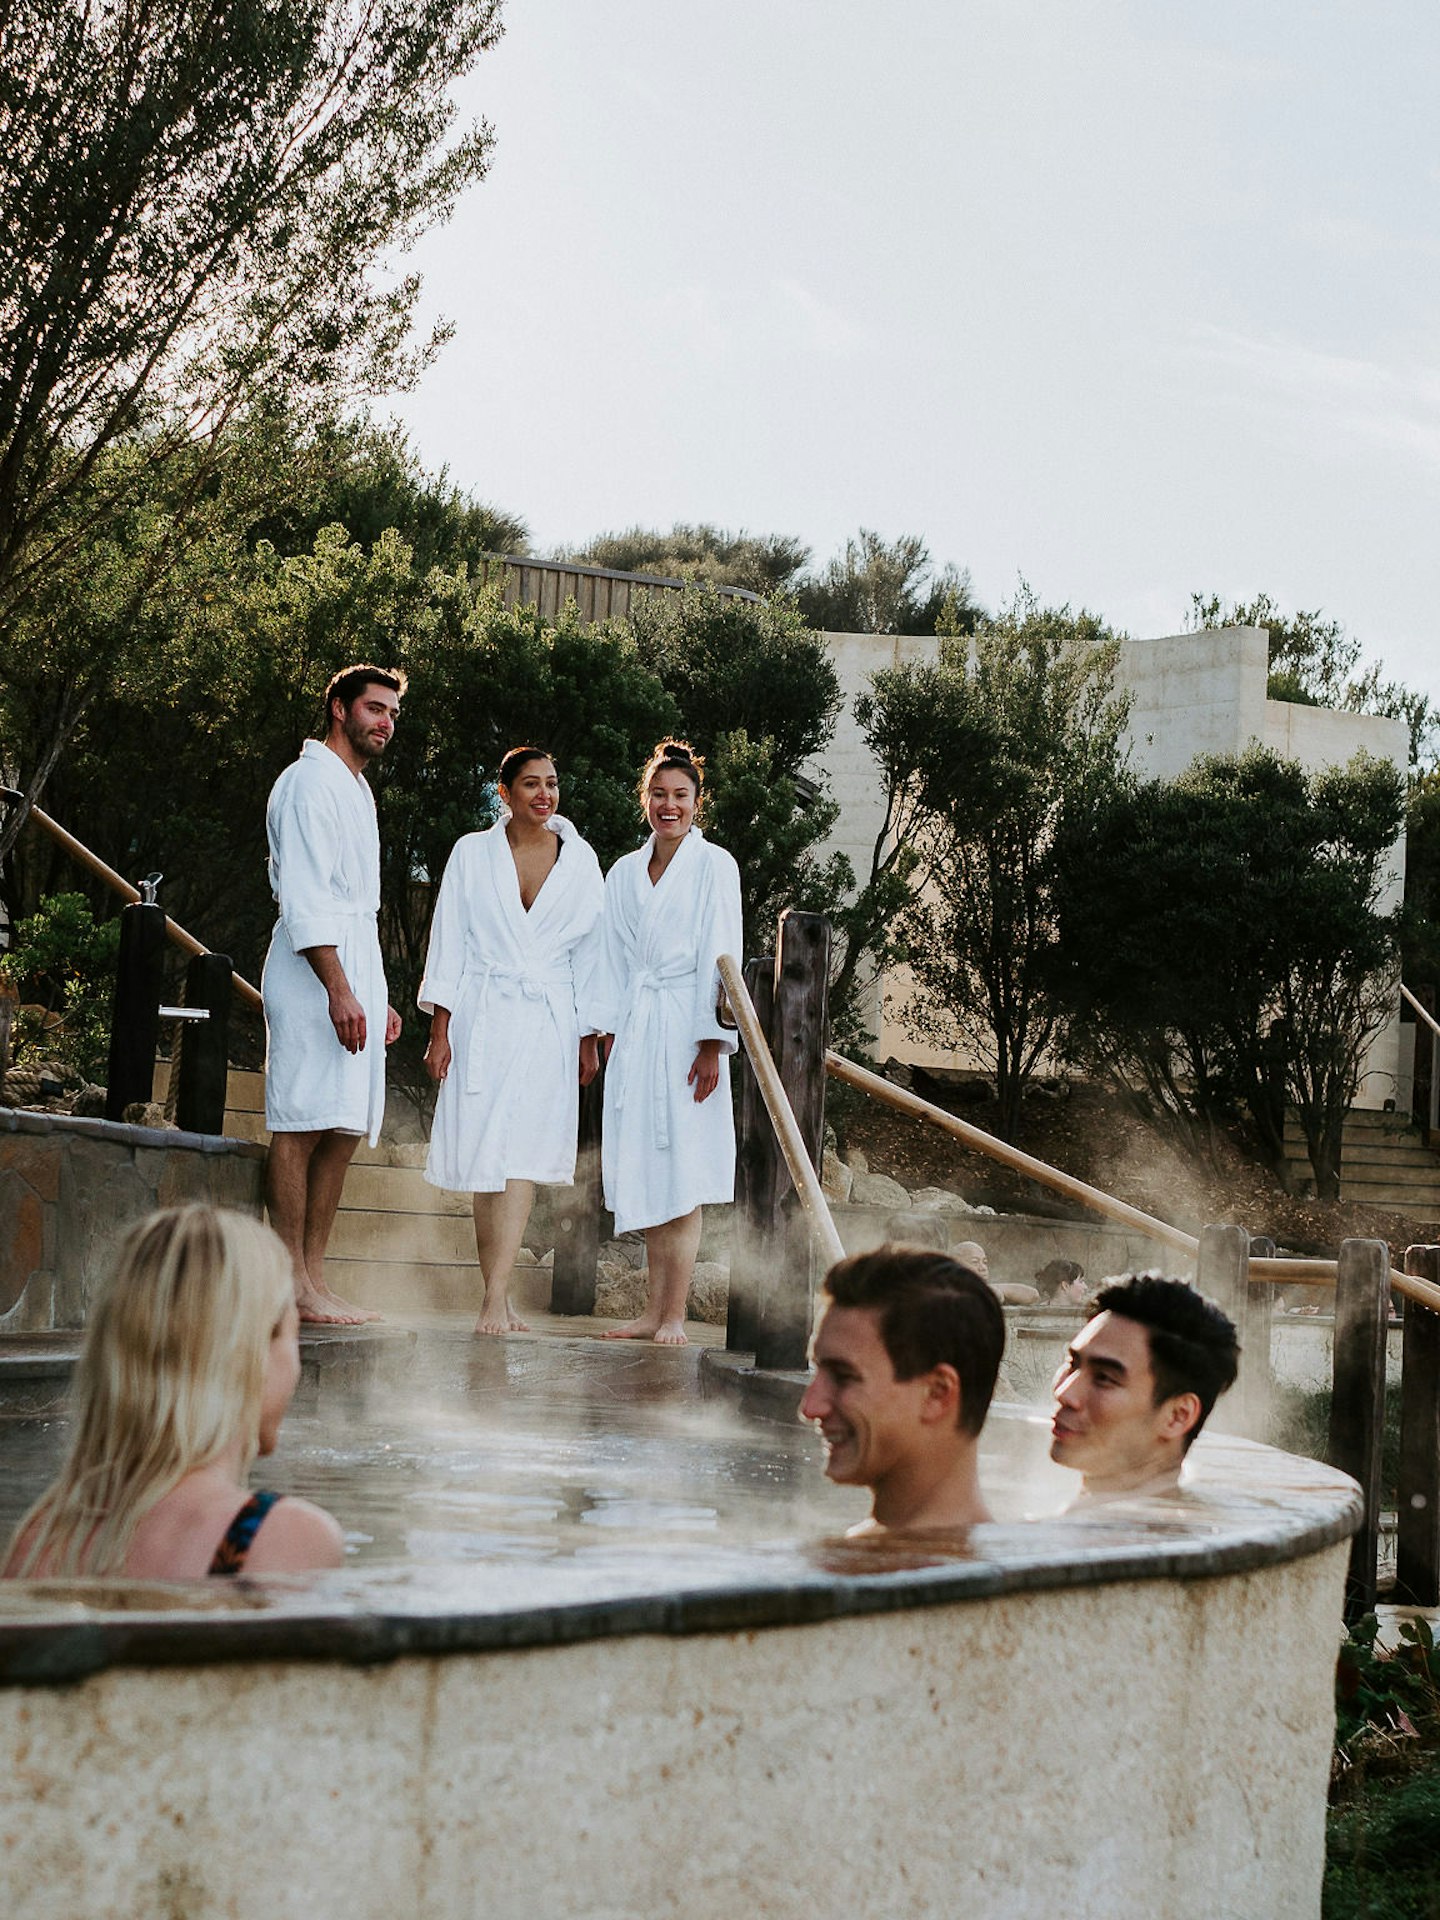 three friends sitting in Amphitheatre hot pool and three friends in white bath robes standing behind